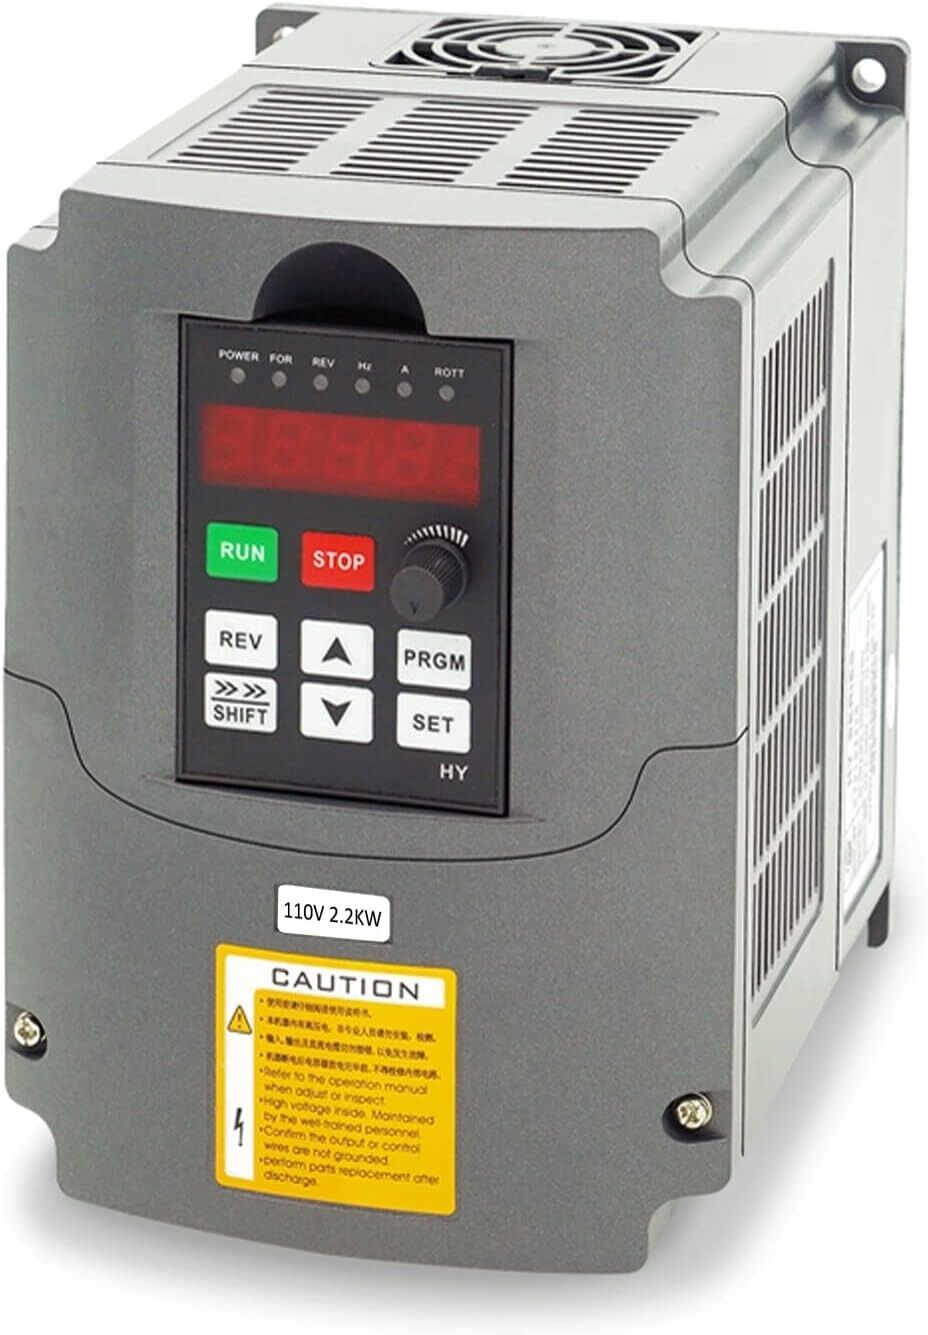 Vfd, Single to 3 Phase,Variable Frequency Drive,2.2Kw 3HP 110V/120V Input AC for